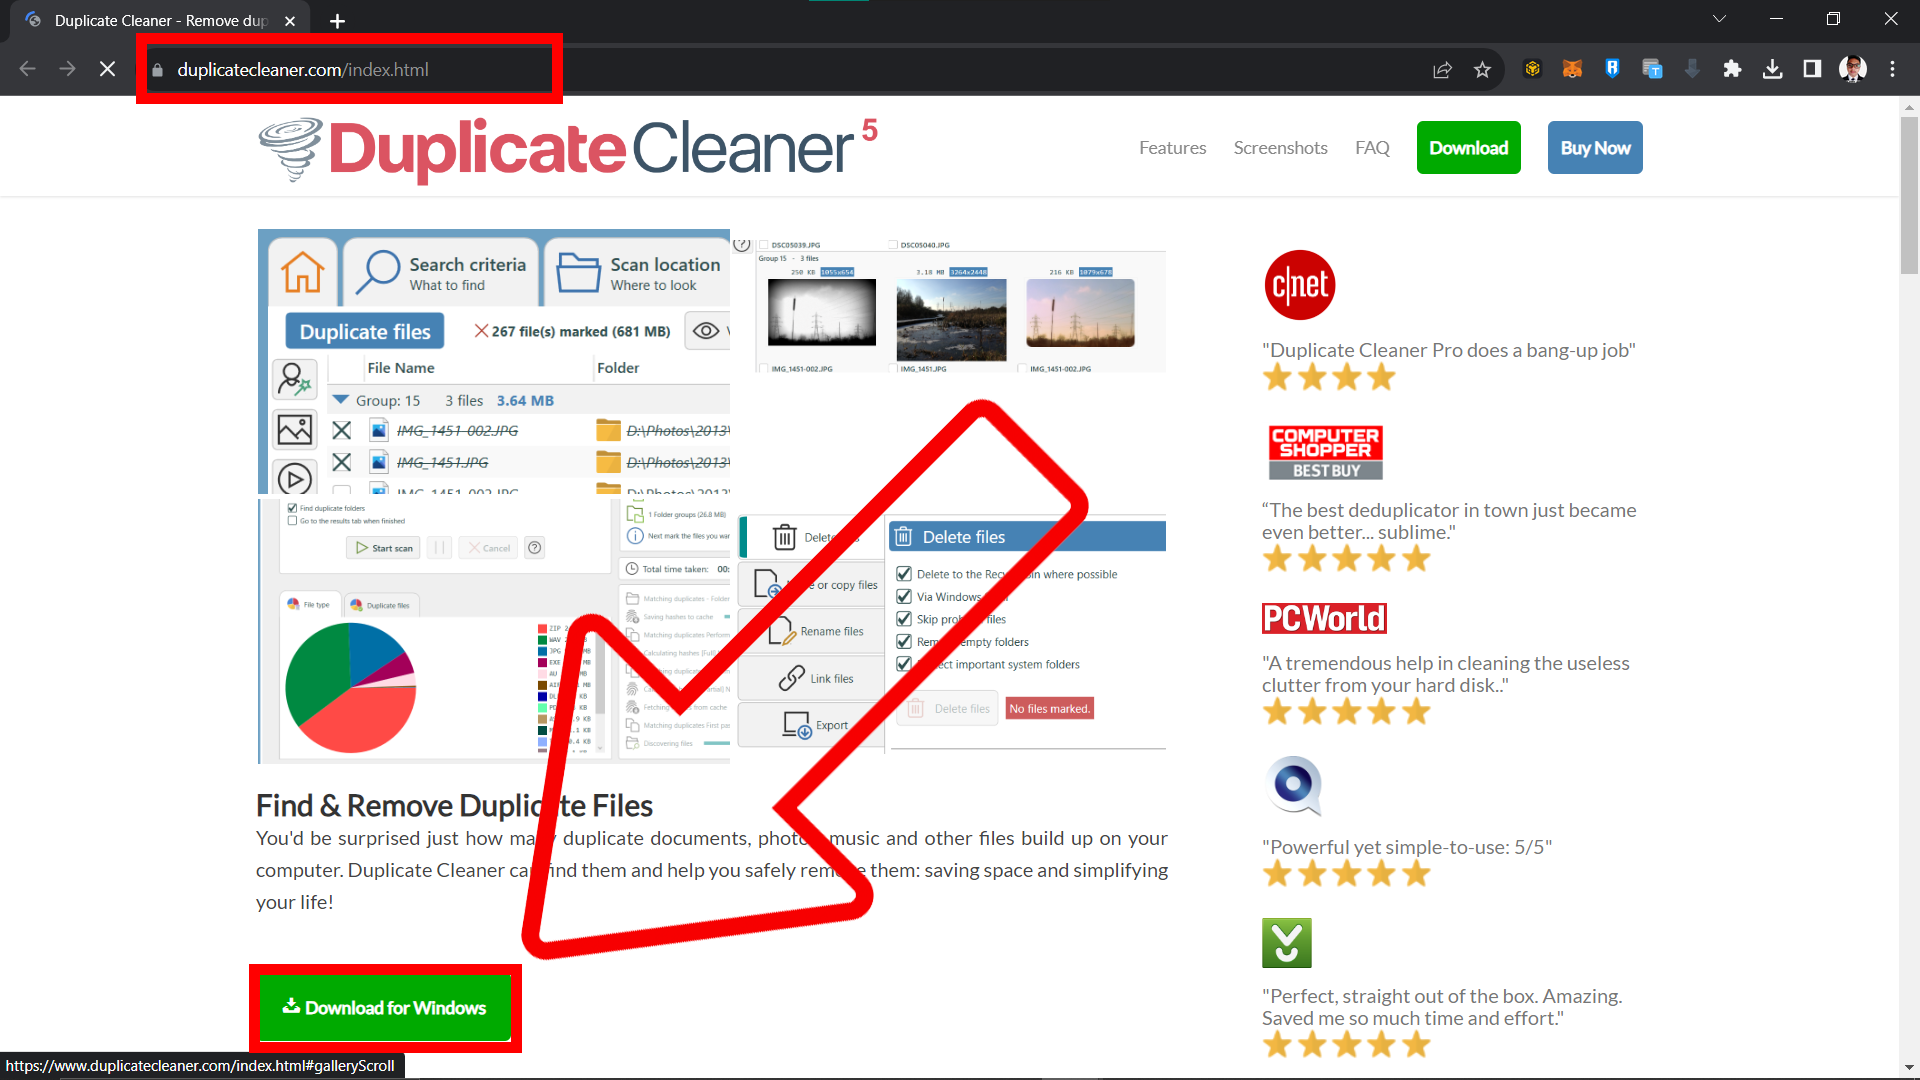 How To Use Duplicate Cleaner to Remove Duplicate Files: Step 1